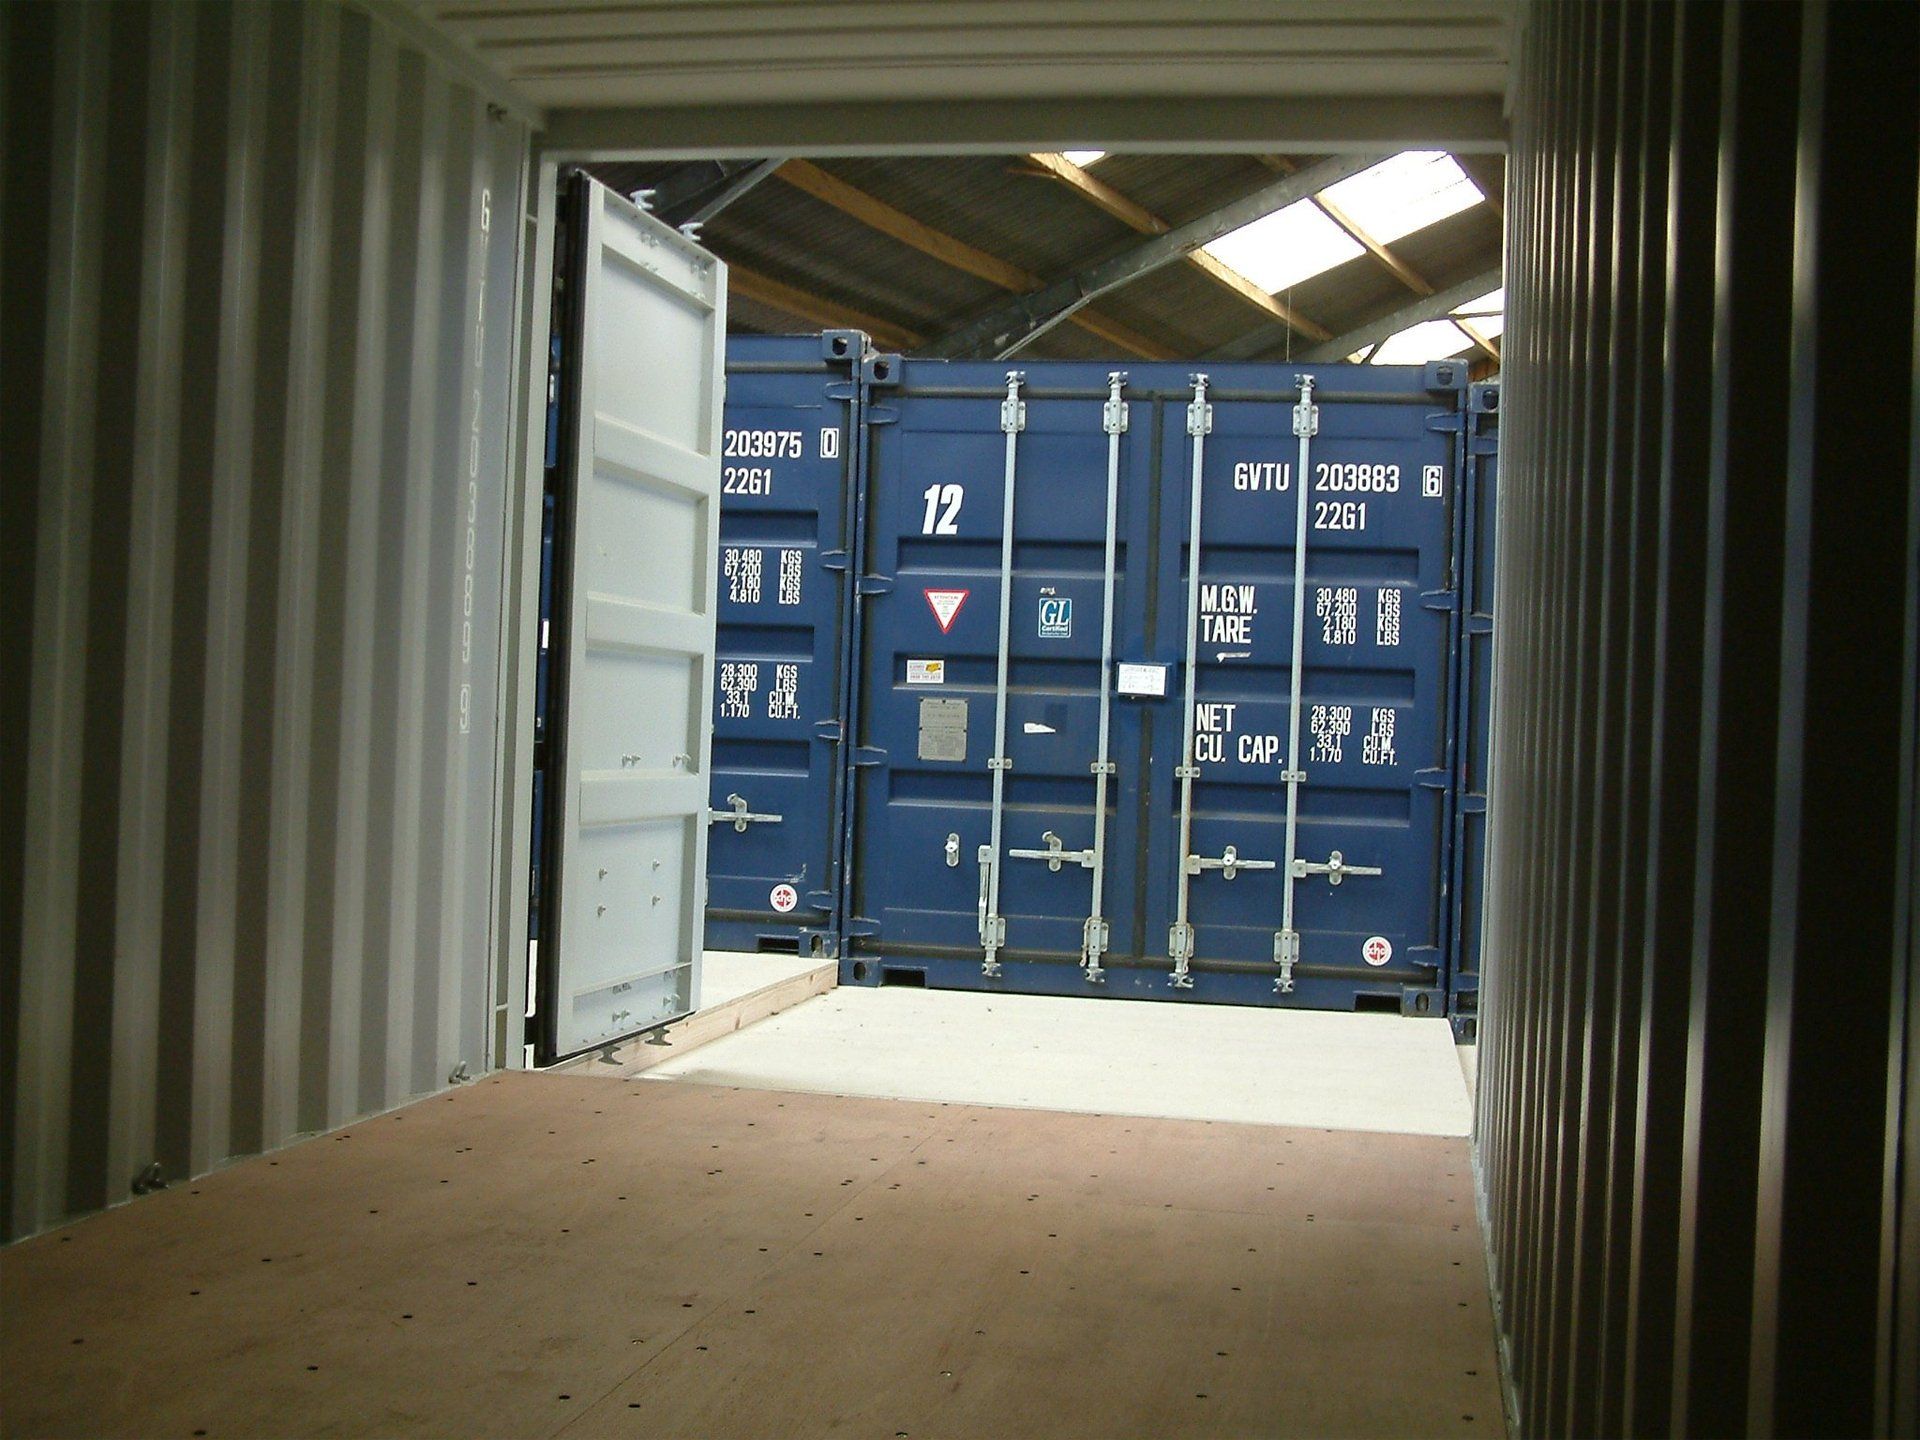 far view of the storage area